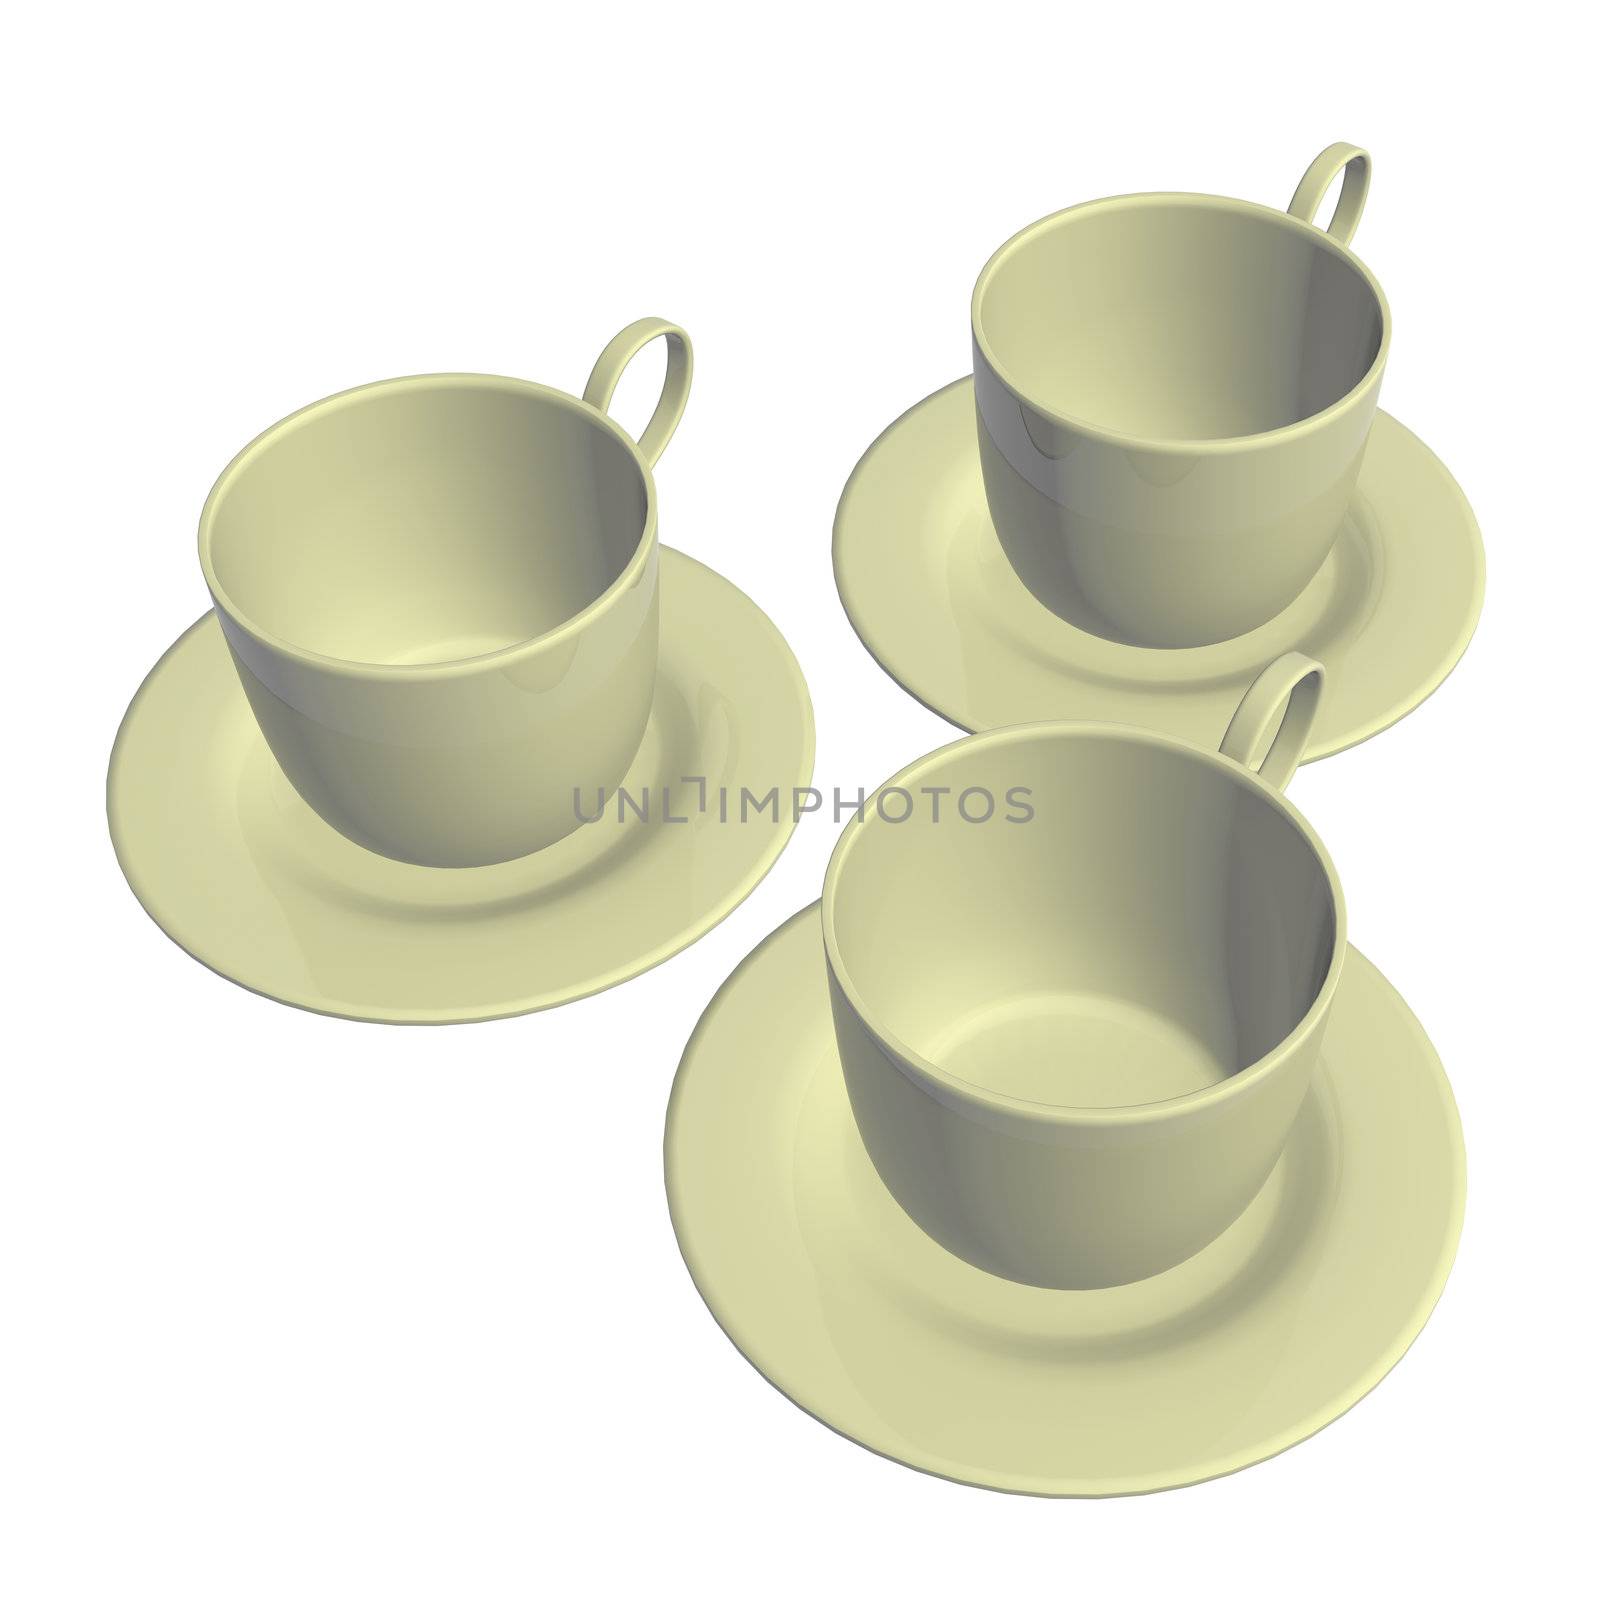 Ceramic tea cups and saucers, 3D illustration by Morphart